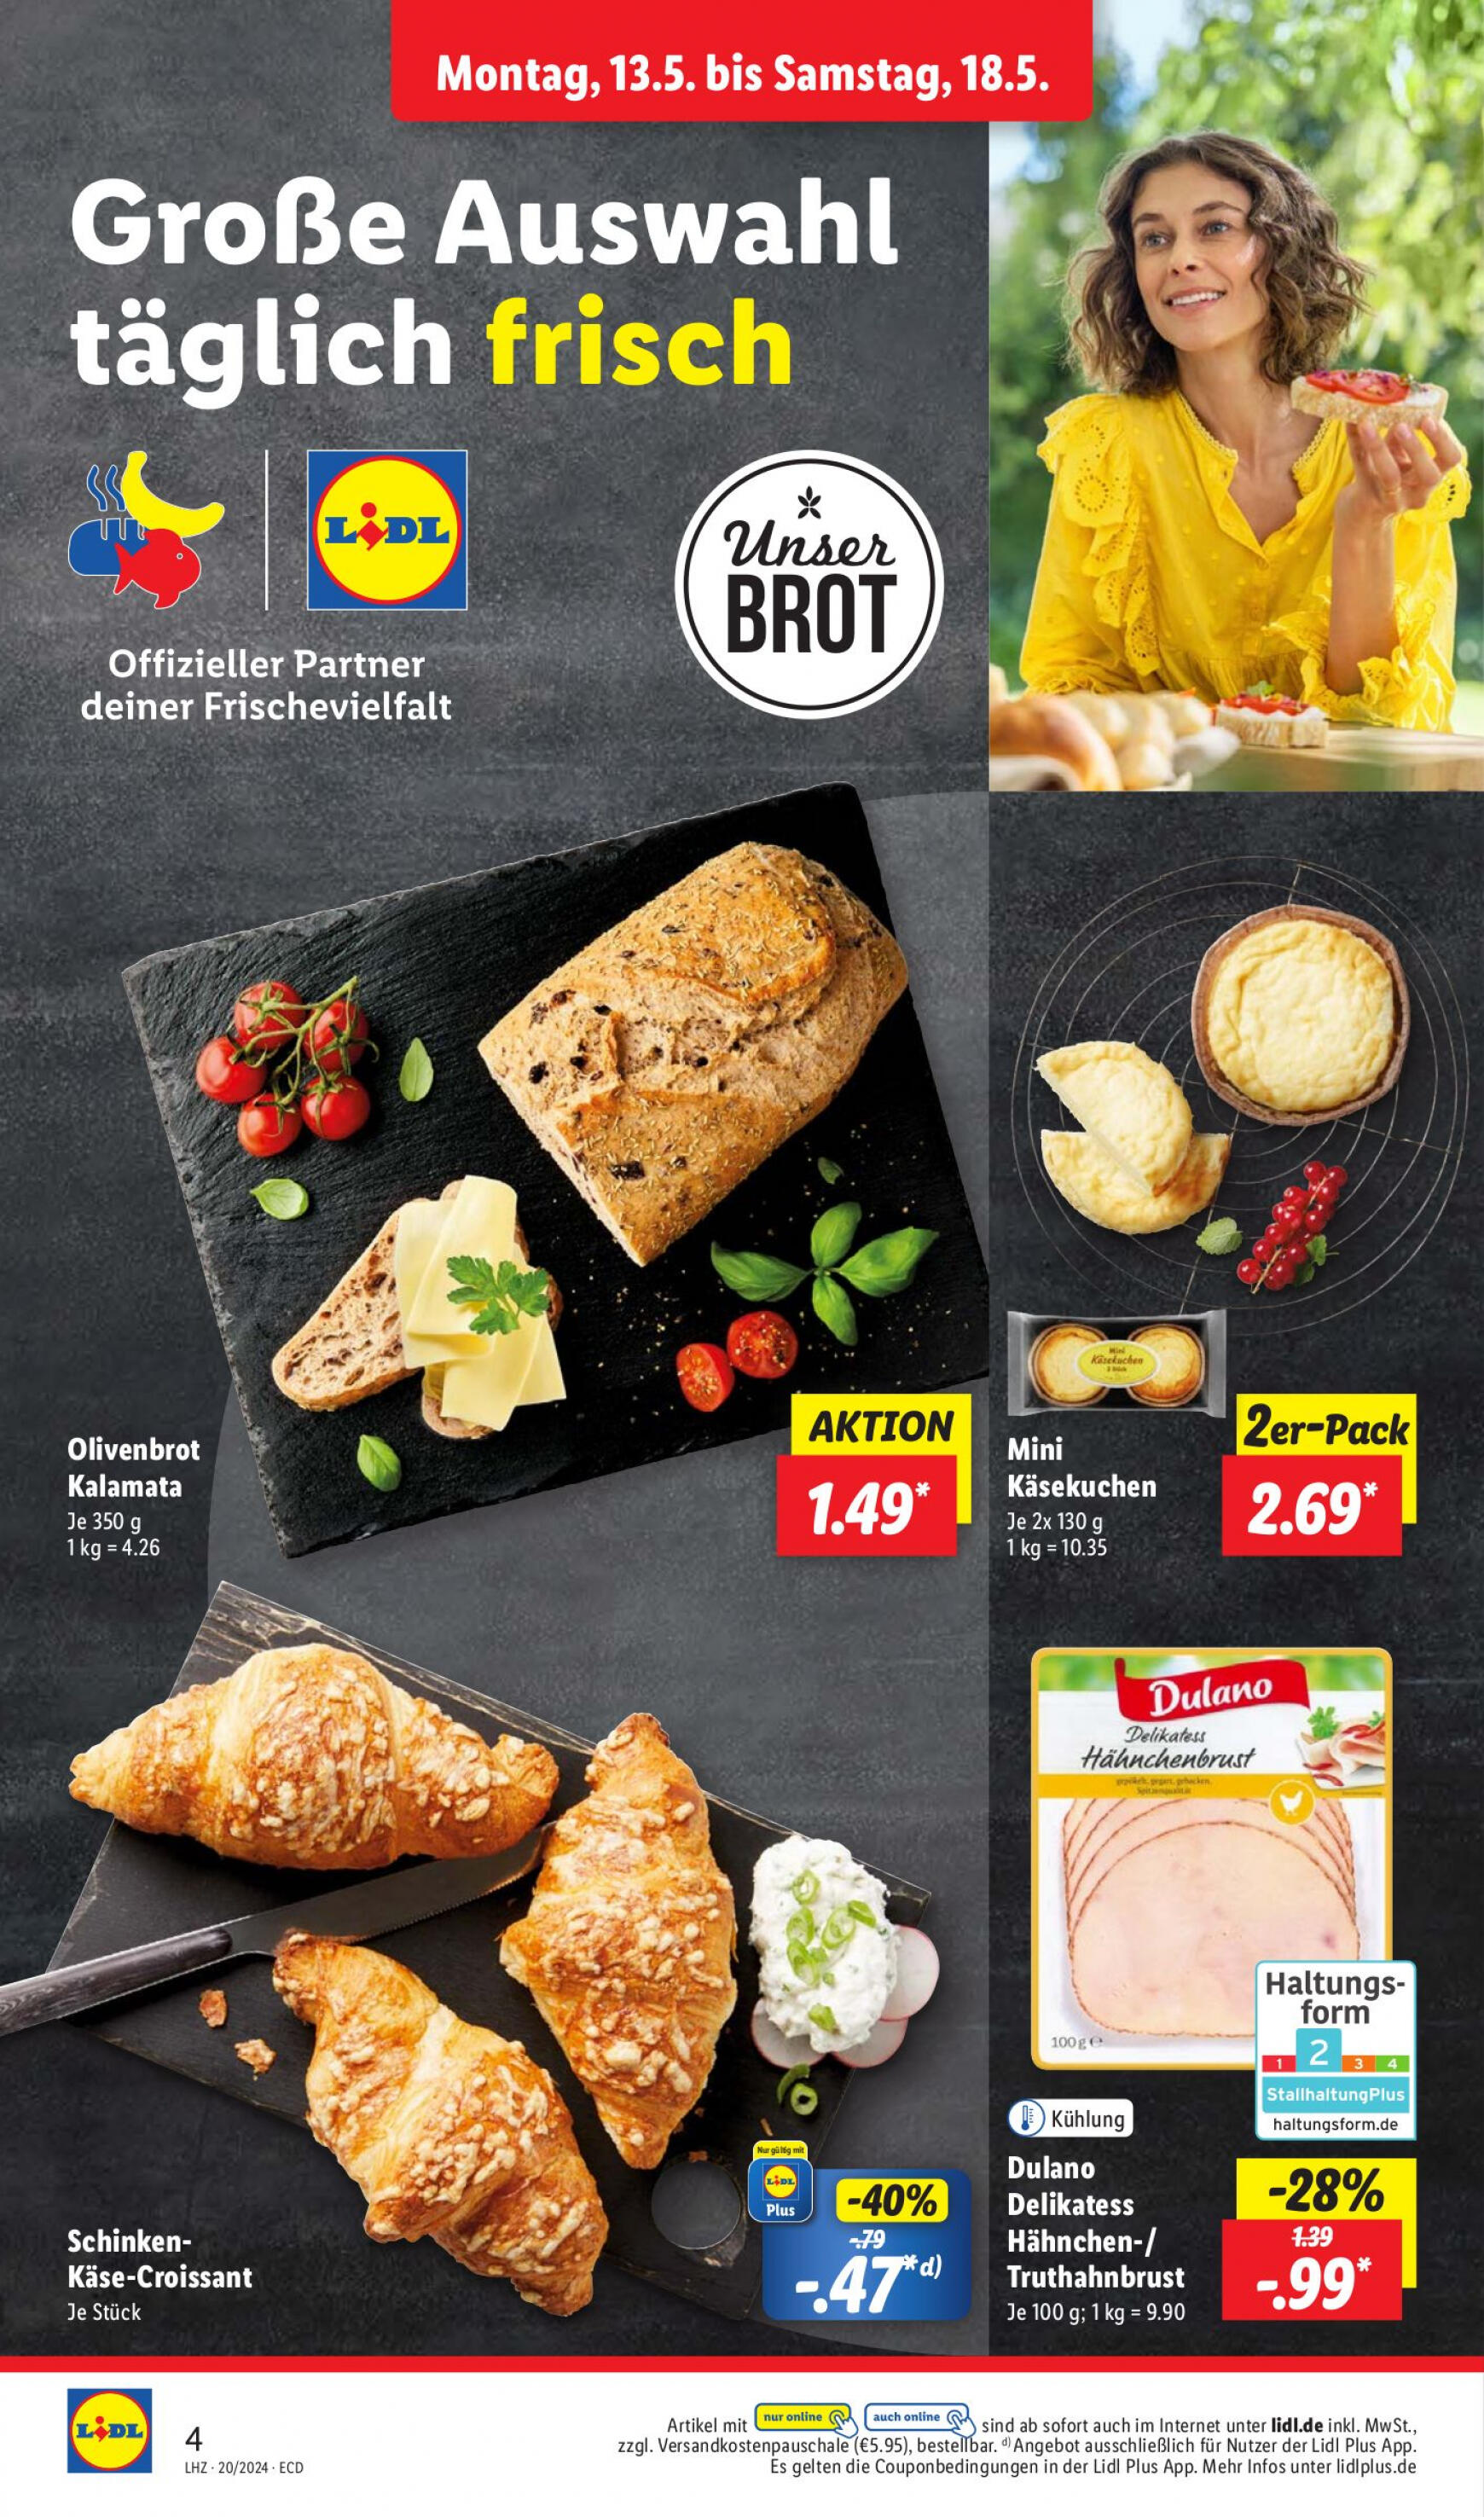 lidl - Flyer Lidl aktuell 13.05. - 18.05. - page: 4